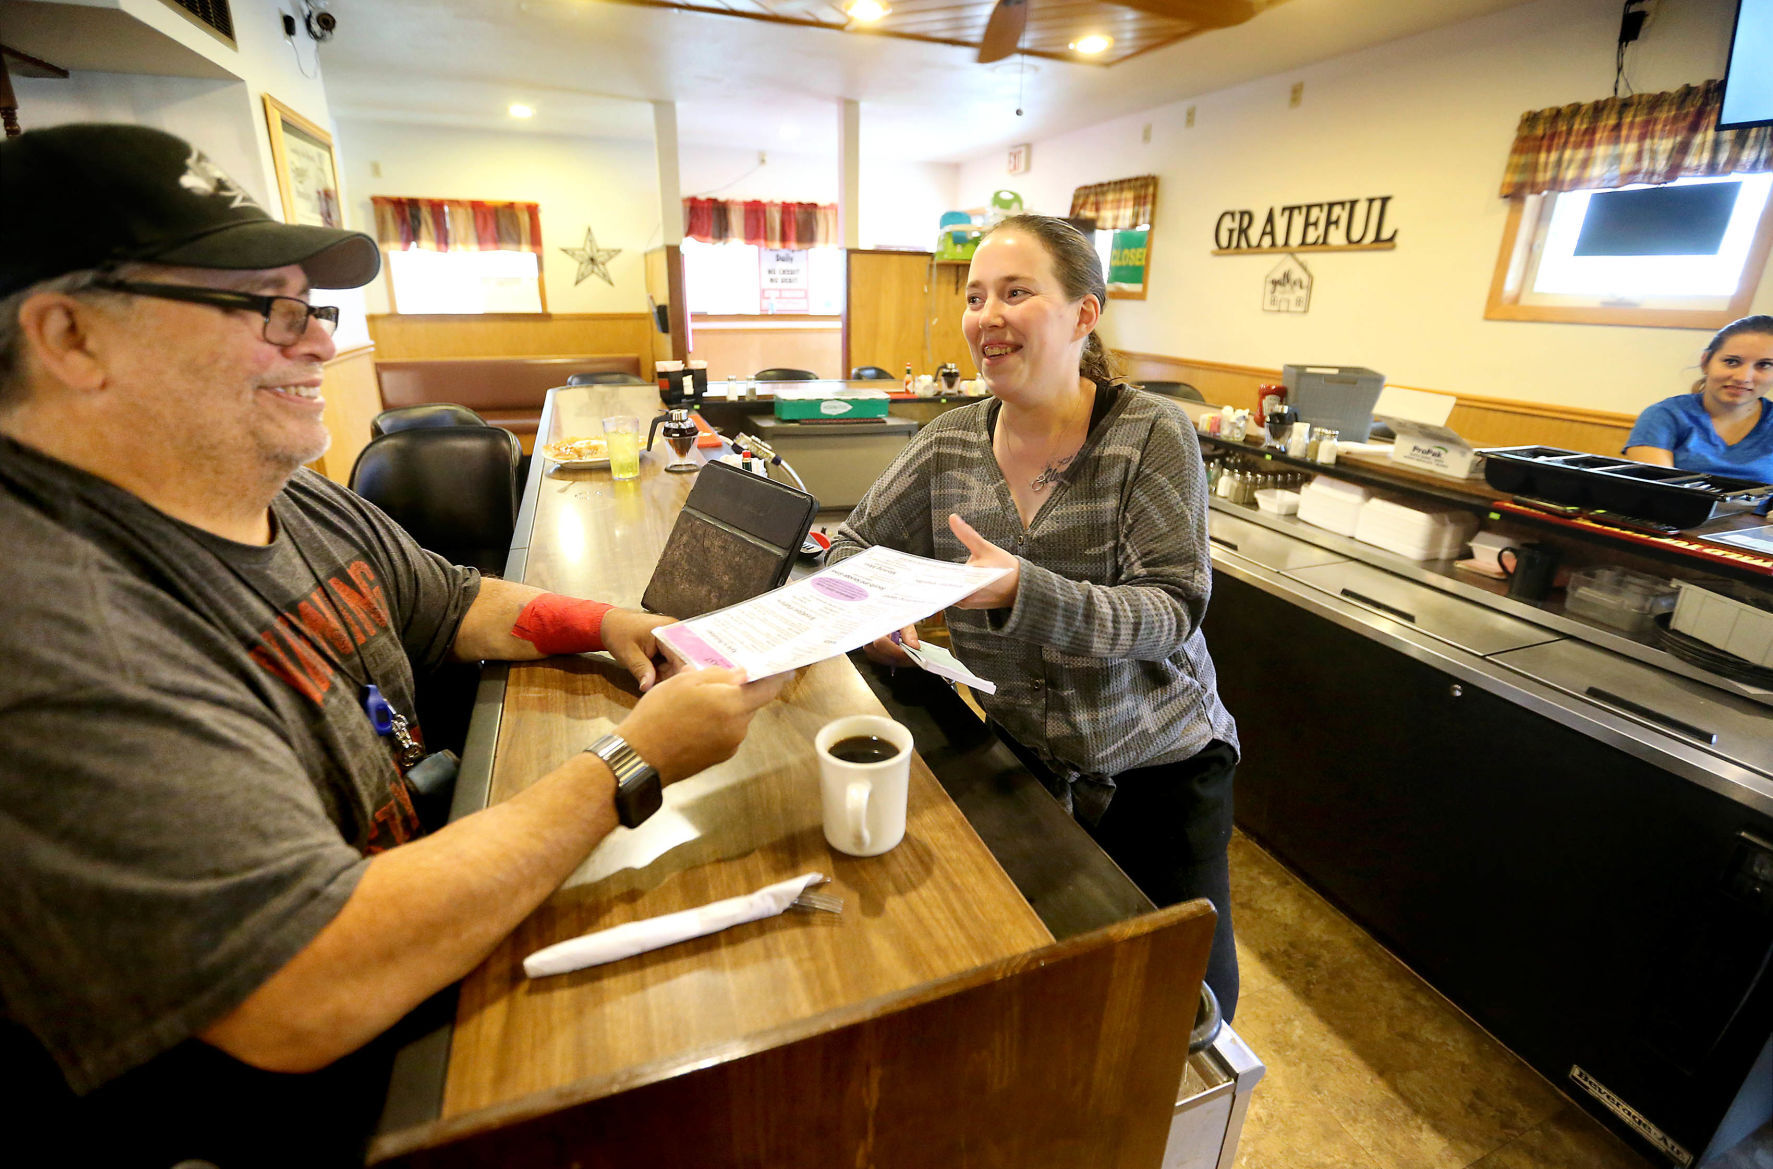 Edward Mumby, of Platteville, Wis., places an order with co-owner Jessica Fields at Katina’s Kitchen in Dickeyville, Wis., Saturday,    PHOTO CREDIT: JESSICA REILLY